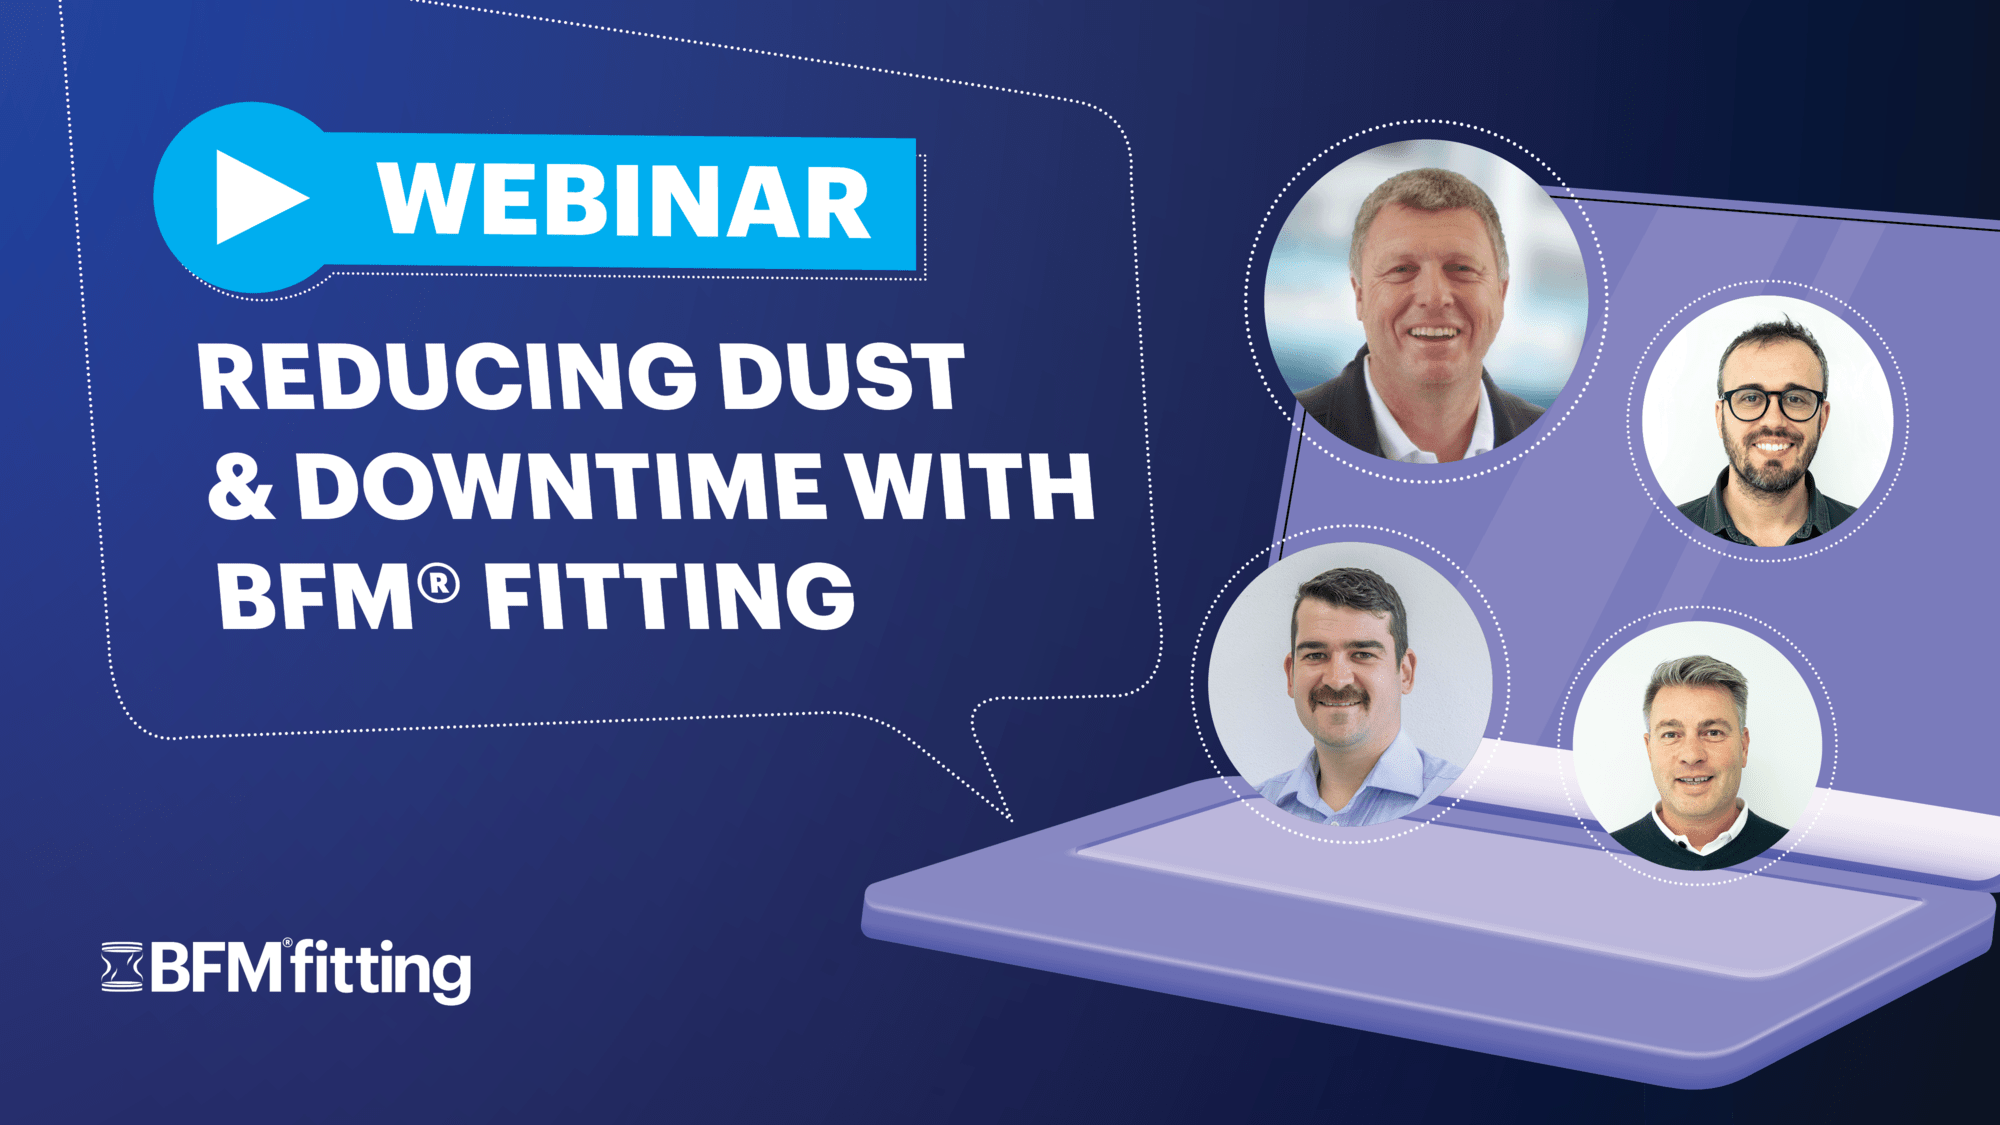 BFM® fitting Webinar: How to Eliminate Dust Leakage & Excess Downtime